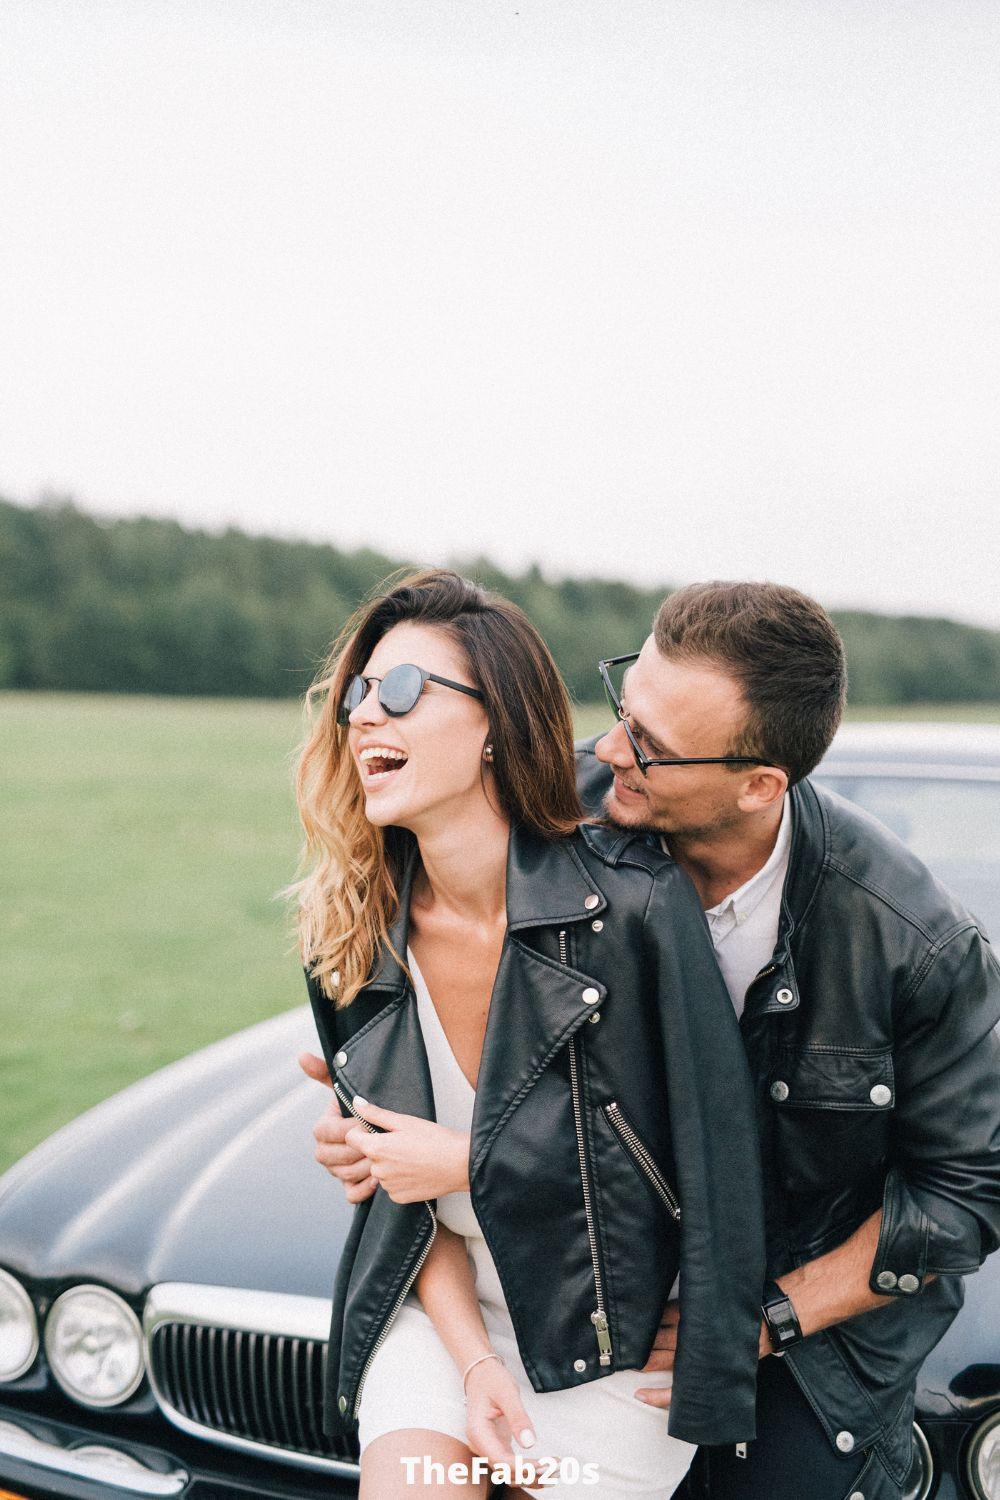 Couple laughing in front of a car 